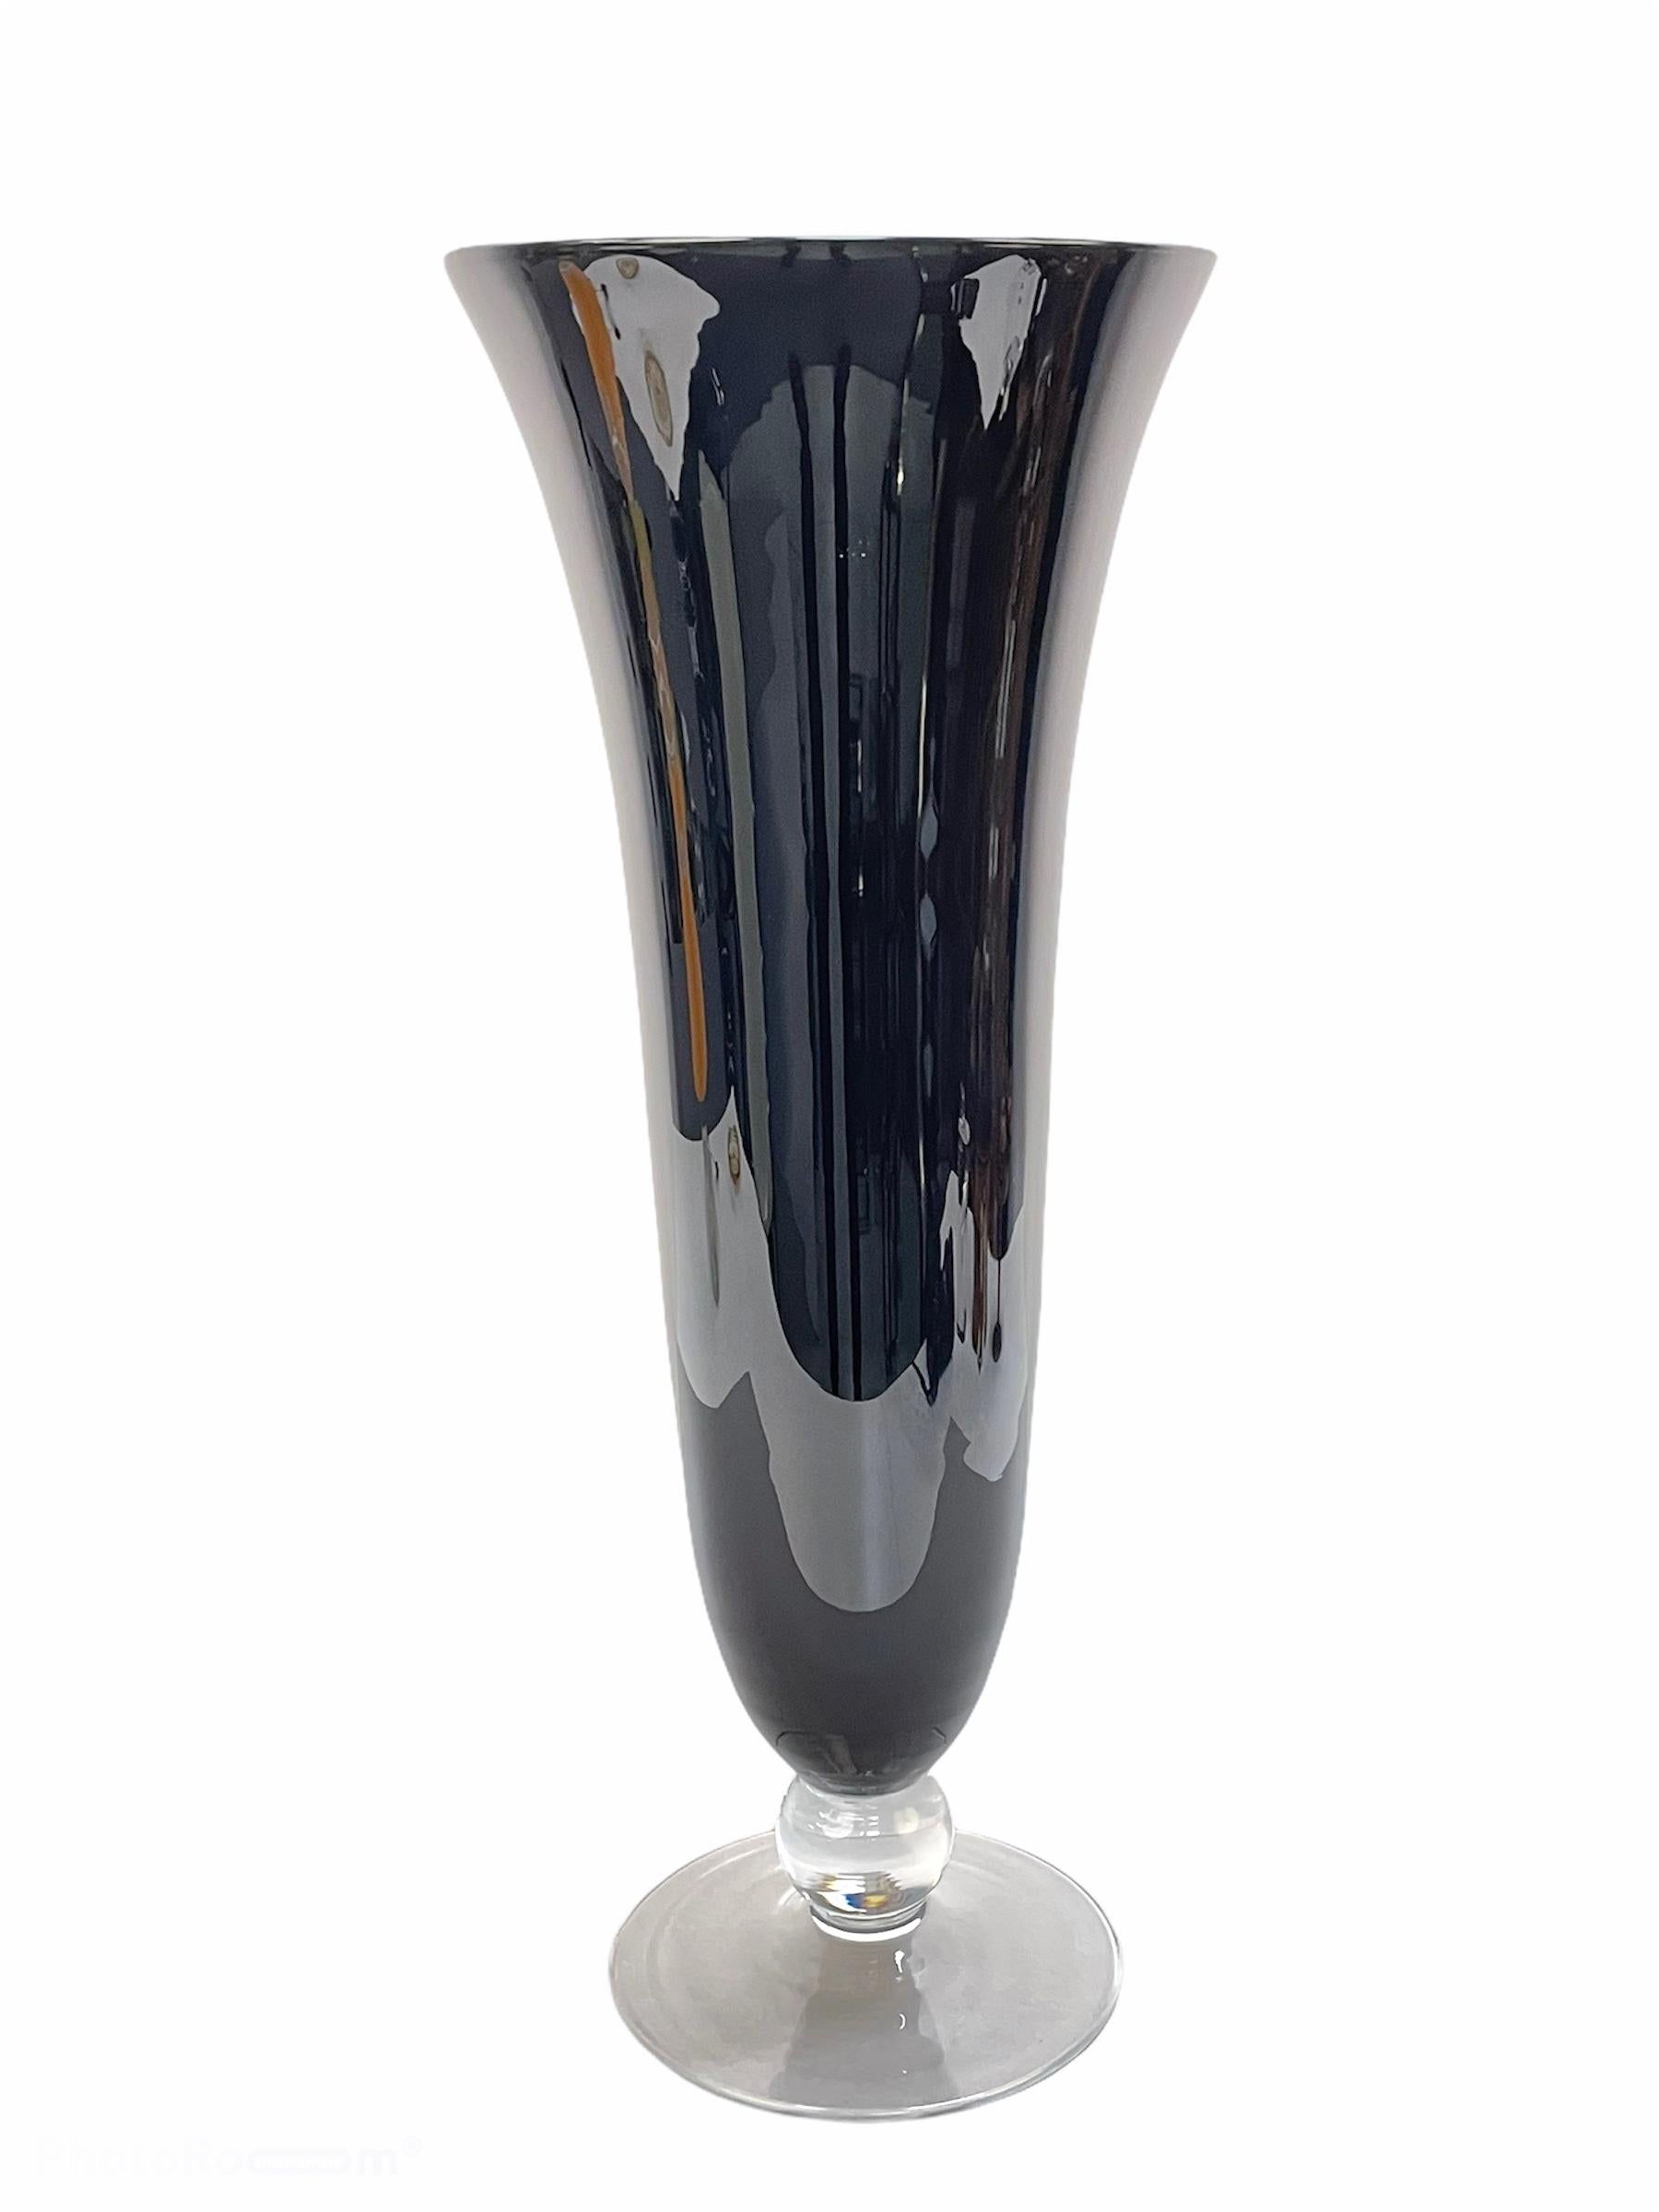 20th Century Midcentury Large Italian Black Glass Artistic Vase with Crystal Base, 1980s For Sale